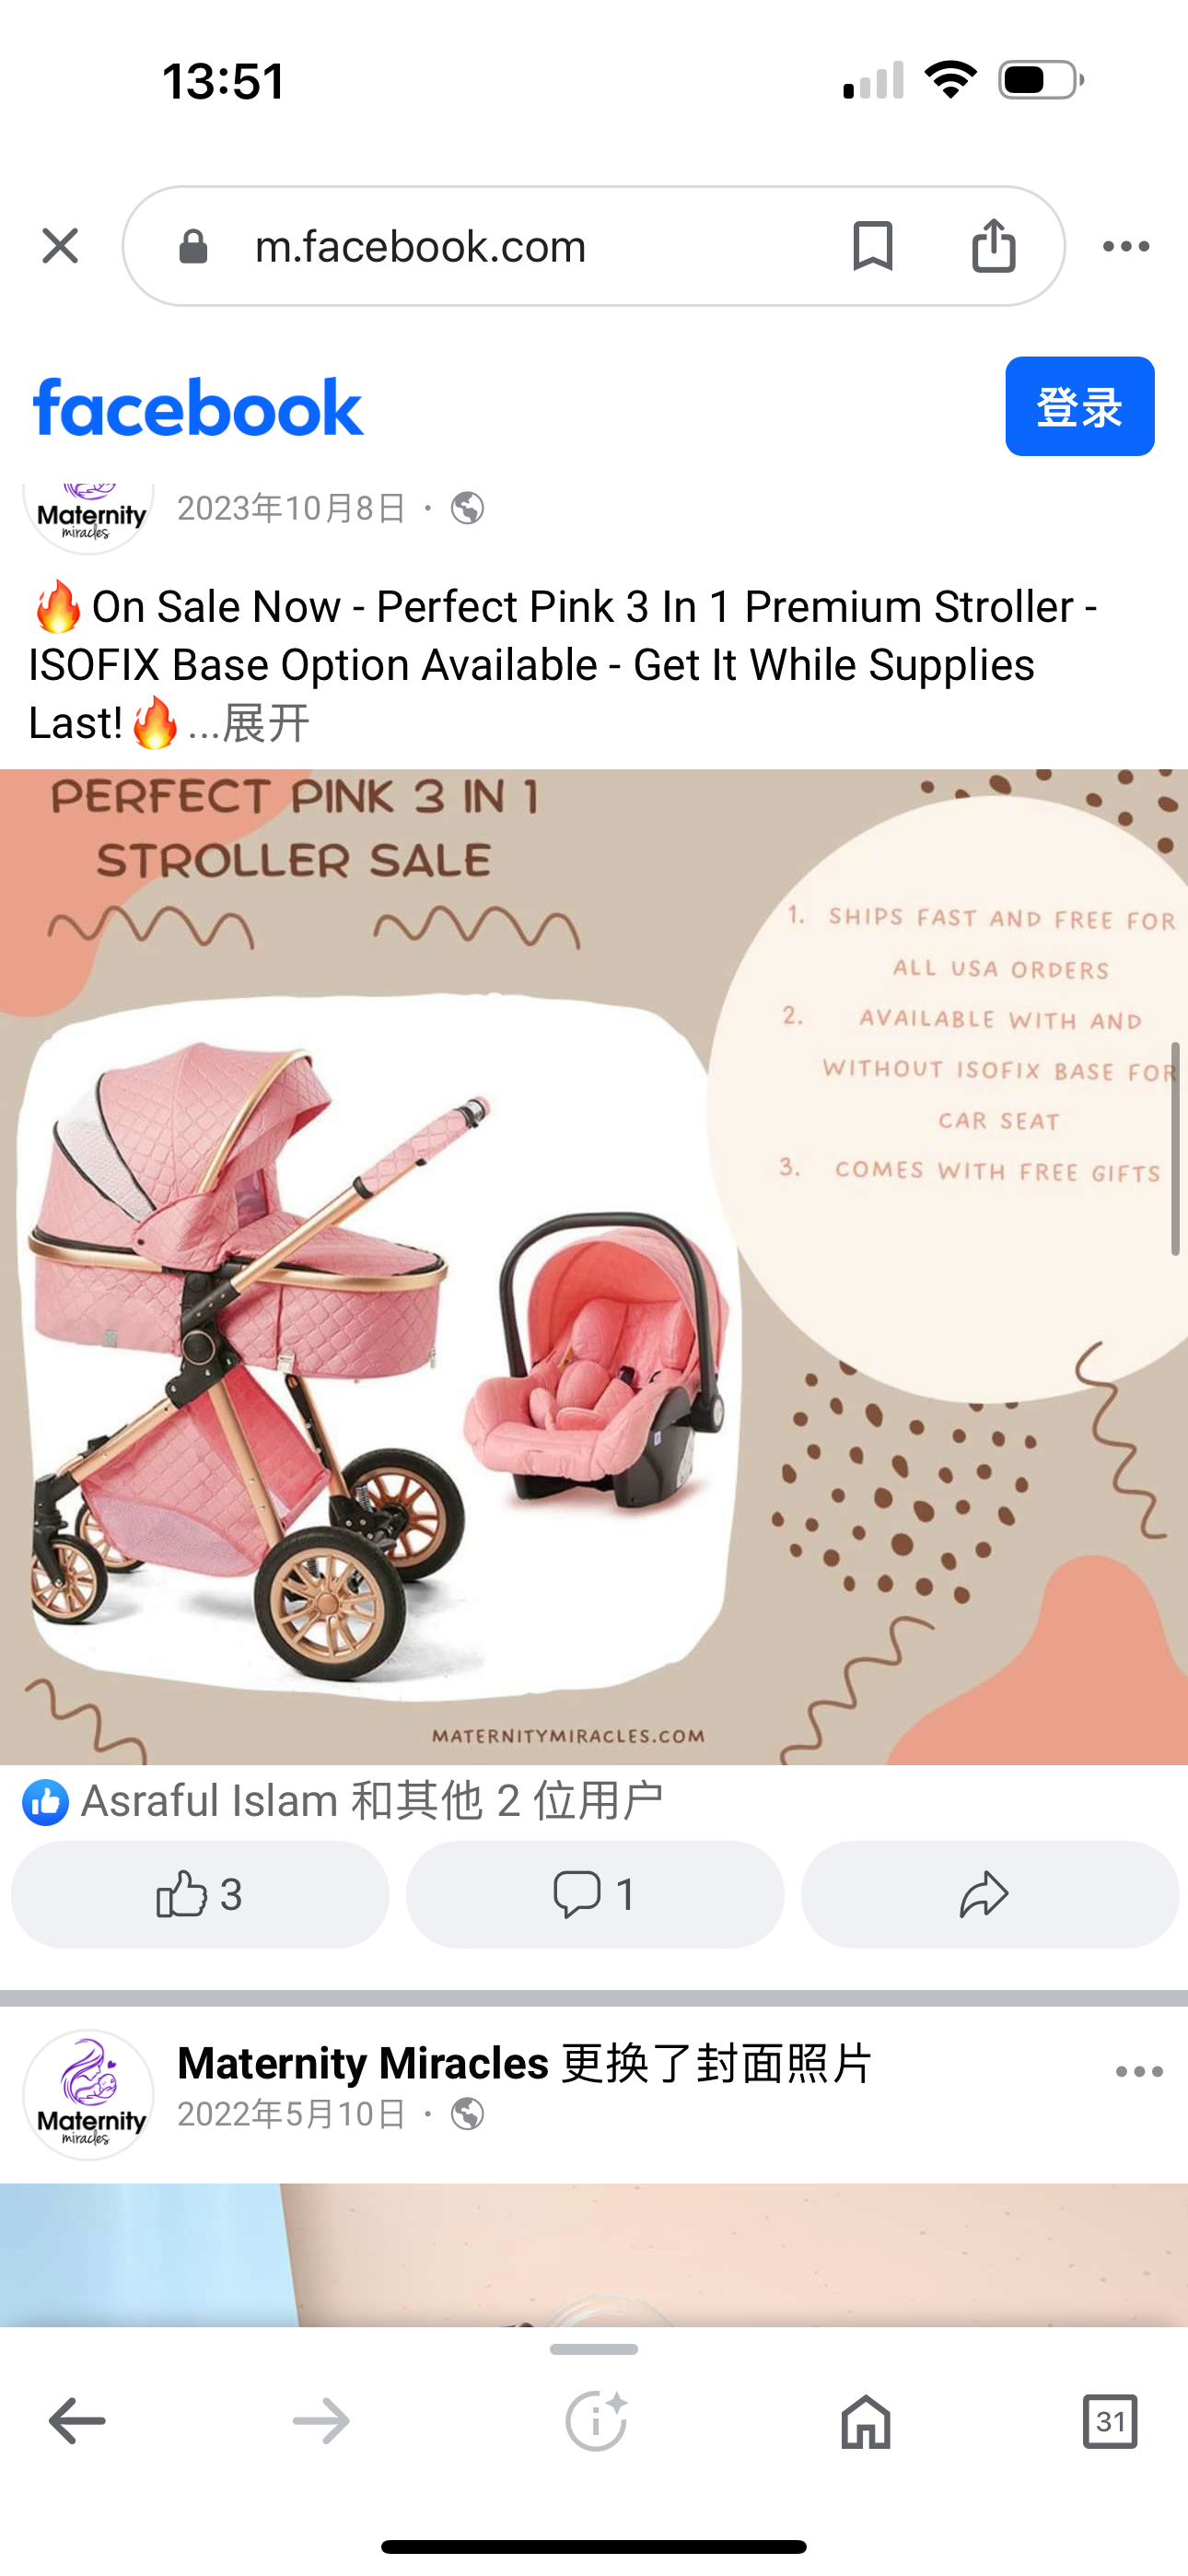 3 in 1 Baby Travel System Infant Baby Stroller Pushchair High Landscape Reversible Foldable Portable Stroller Newborn Pram Reclining Baby Carriage (Pink)